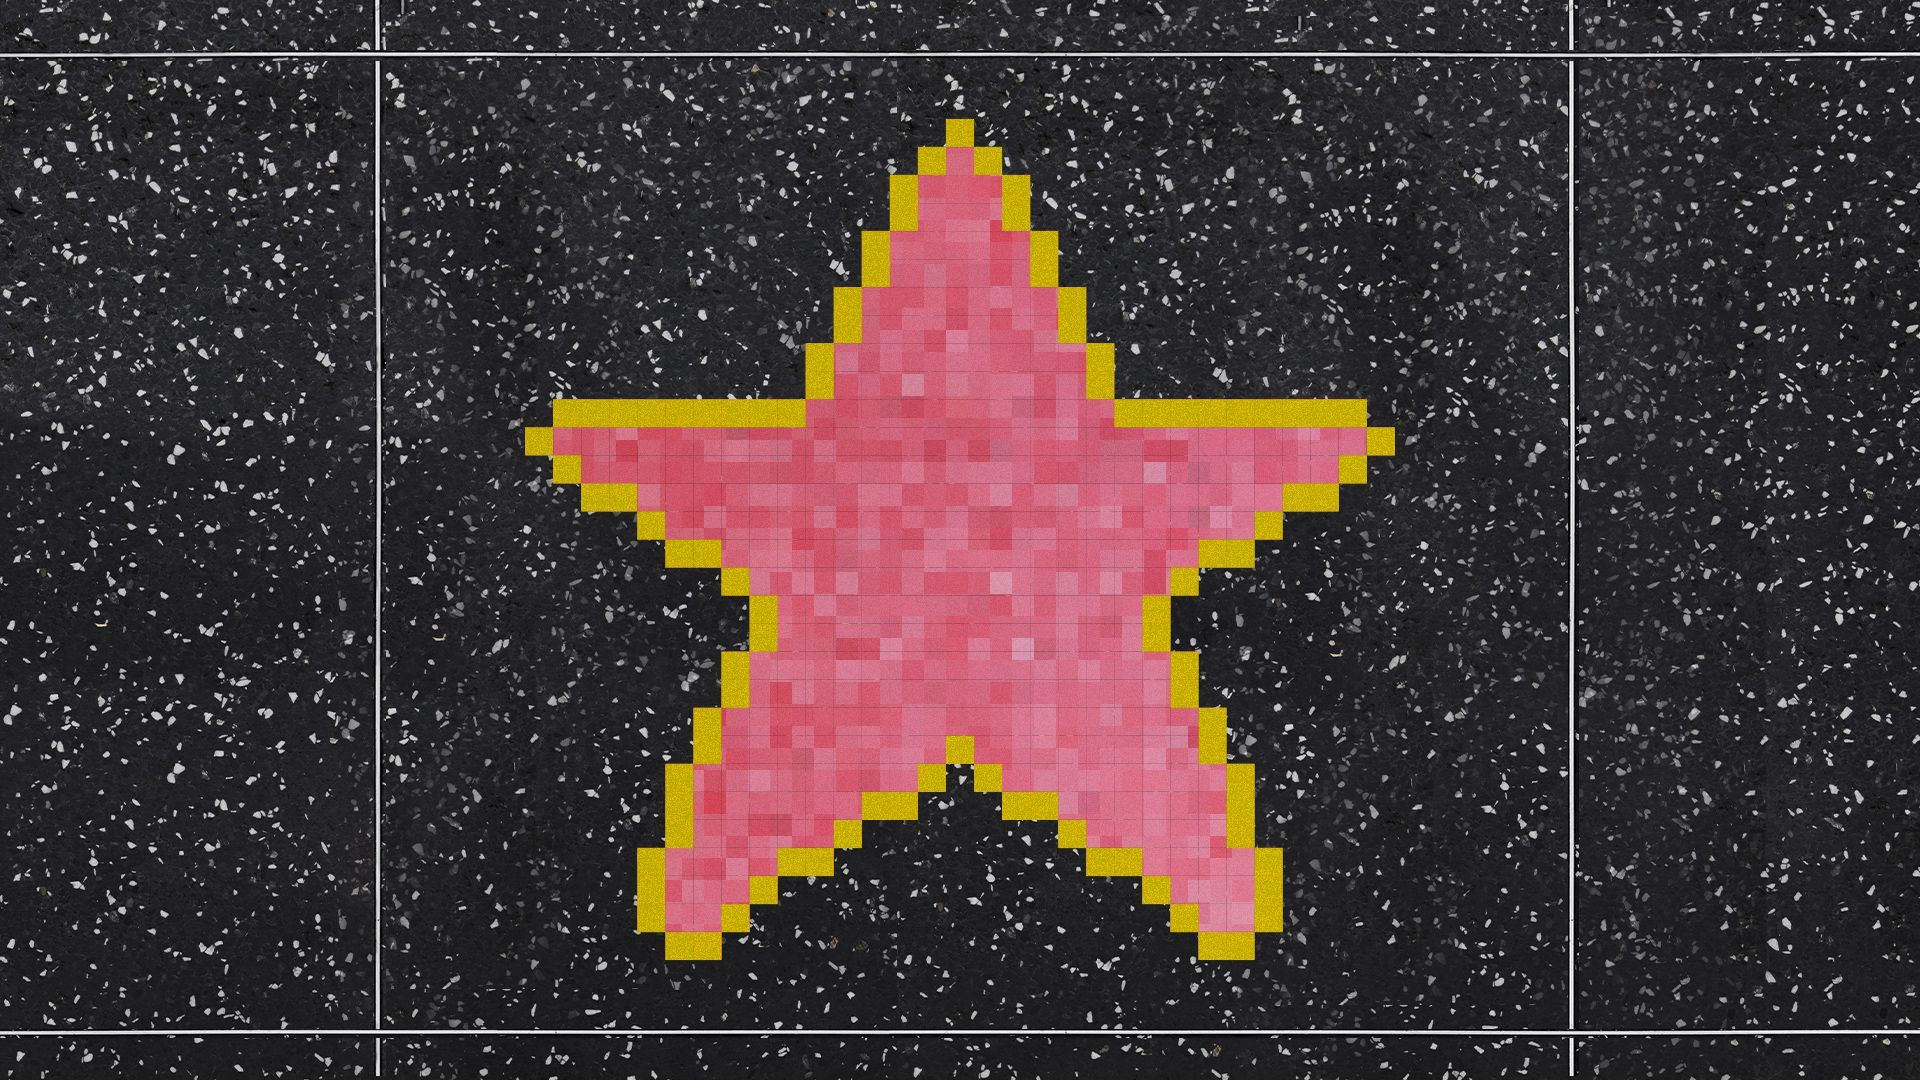 Illustration of the Walk of Fame with a pixelated star engraved on the ground. 